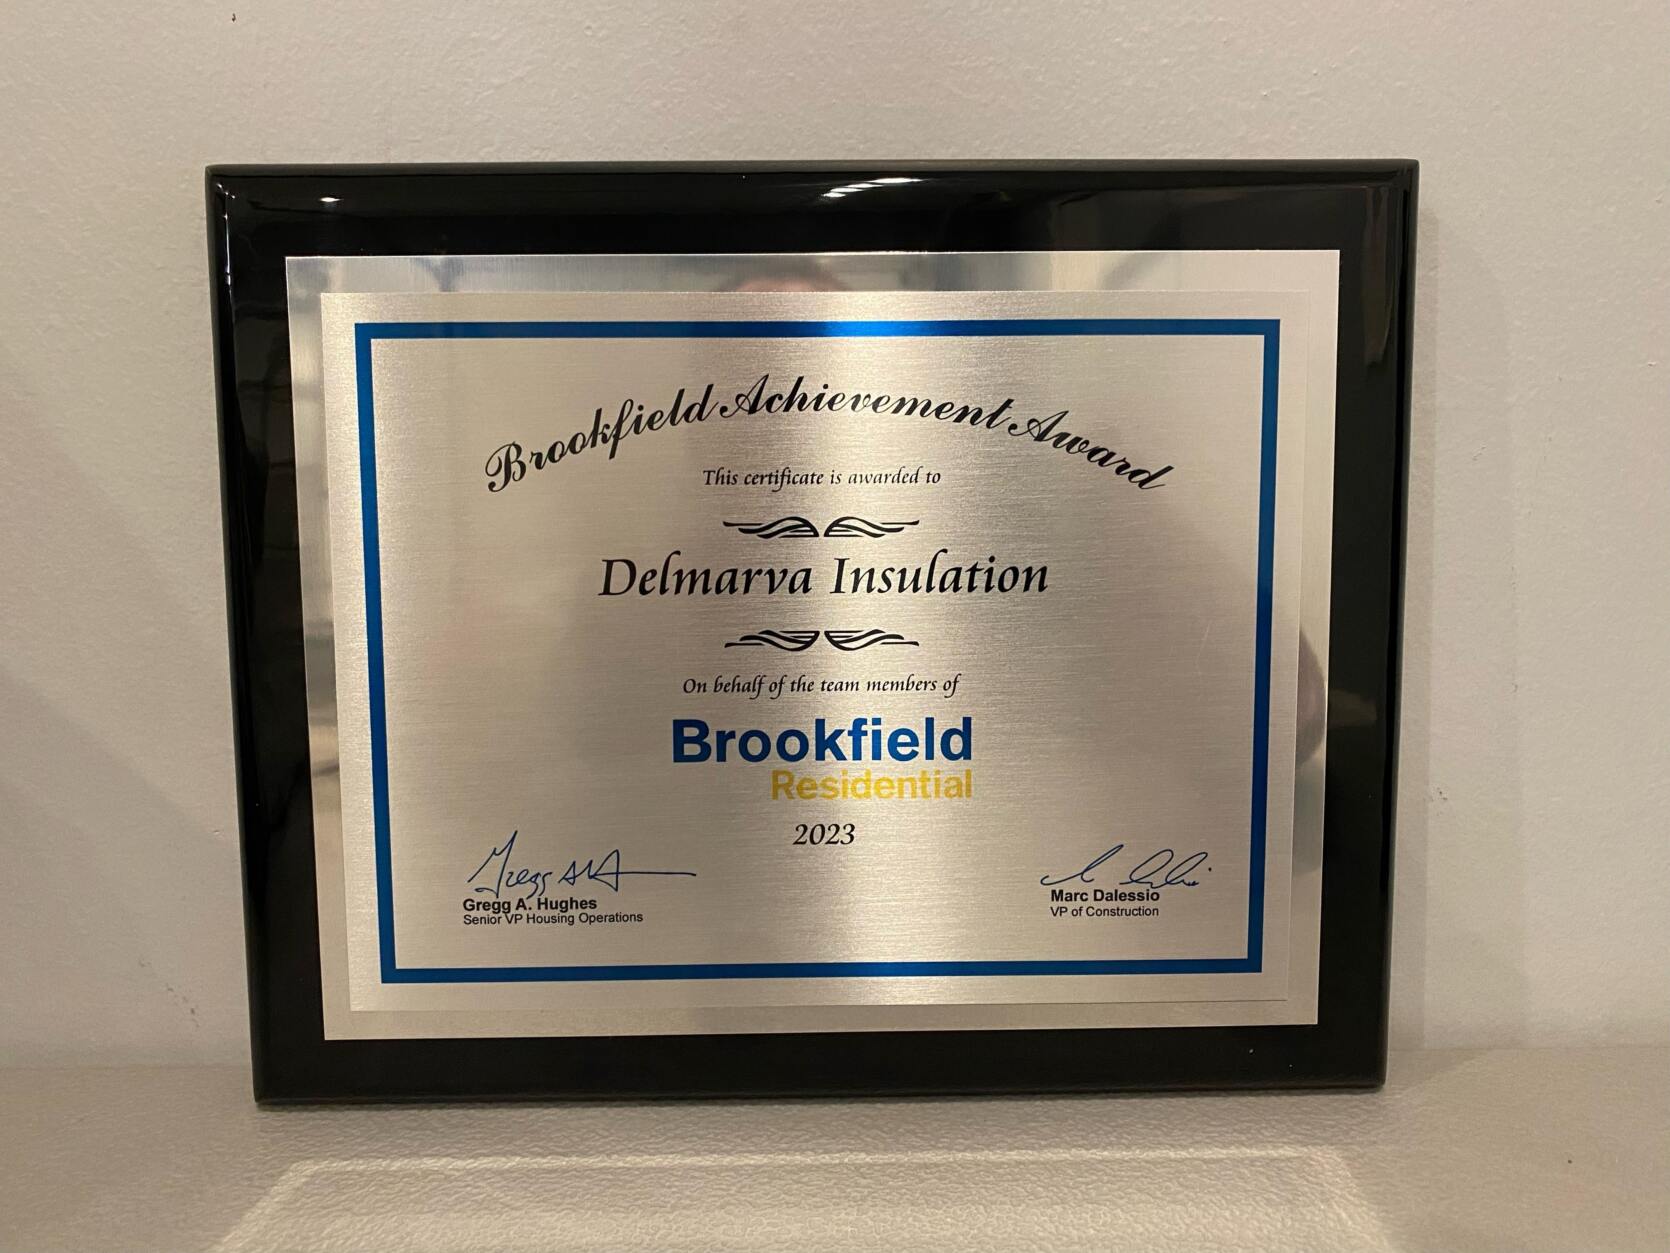 "Brookfield Achievement Award. This certificate is awarded to Delmarva Insulation. On behalf of the team members of Brookfield Residential. 2023. Signed, Gregg A. Hughes, Senior VP Housing Operations and Marc Dalessio, VP of Construction."